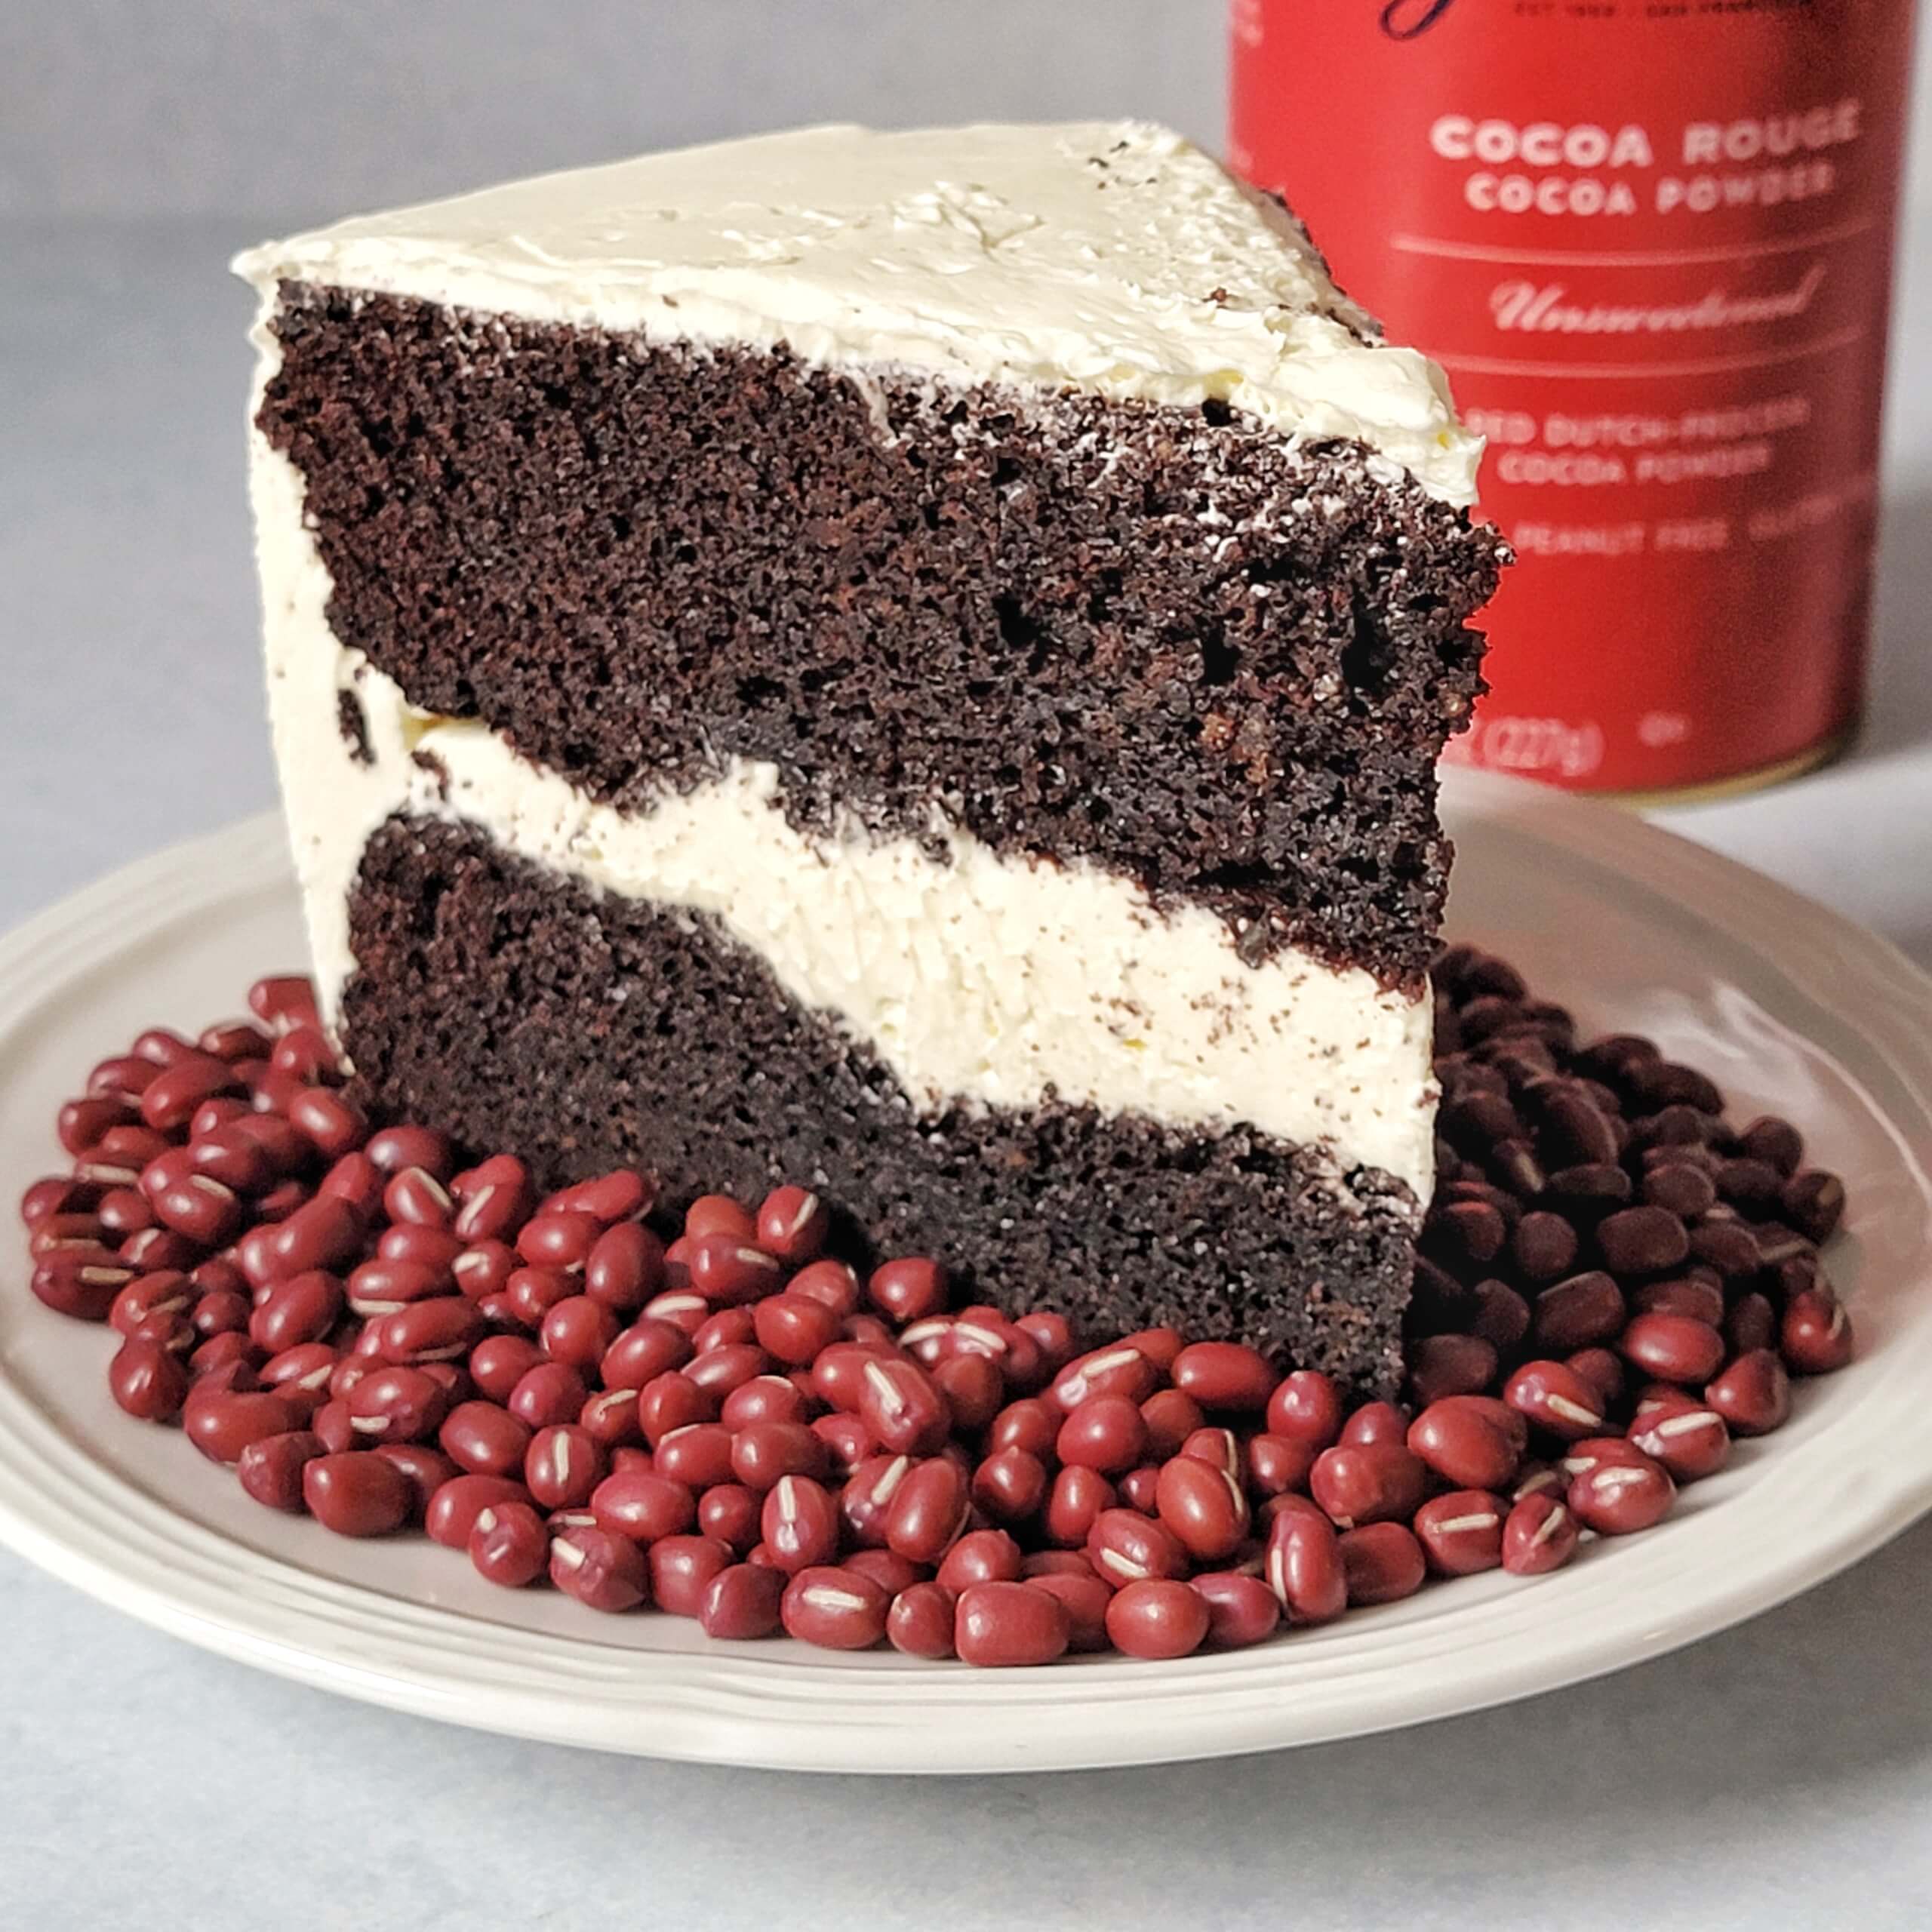 Photo of a thick slice of rich chocolate layer cake with white frosting on a plate surrounded by dry adzuki beans. A container of cocoa powder is in the background.